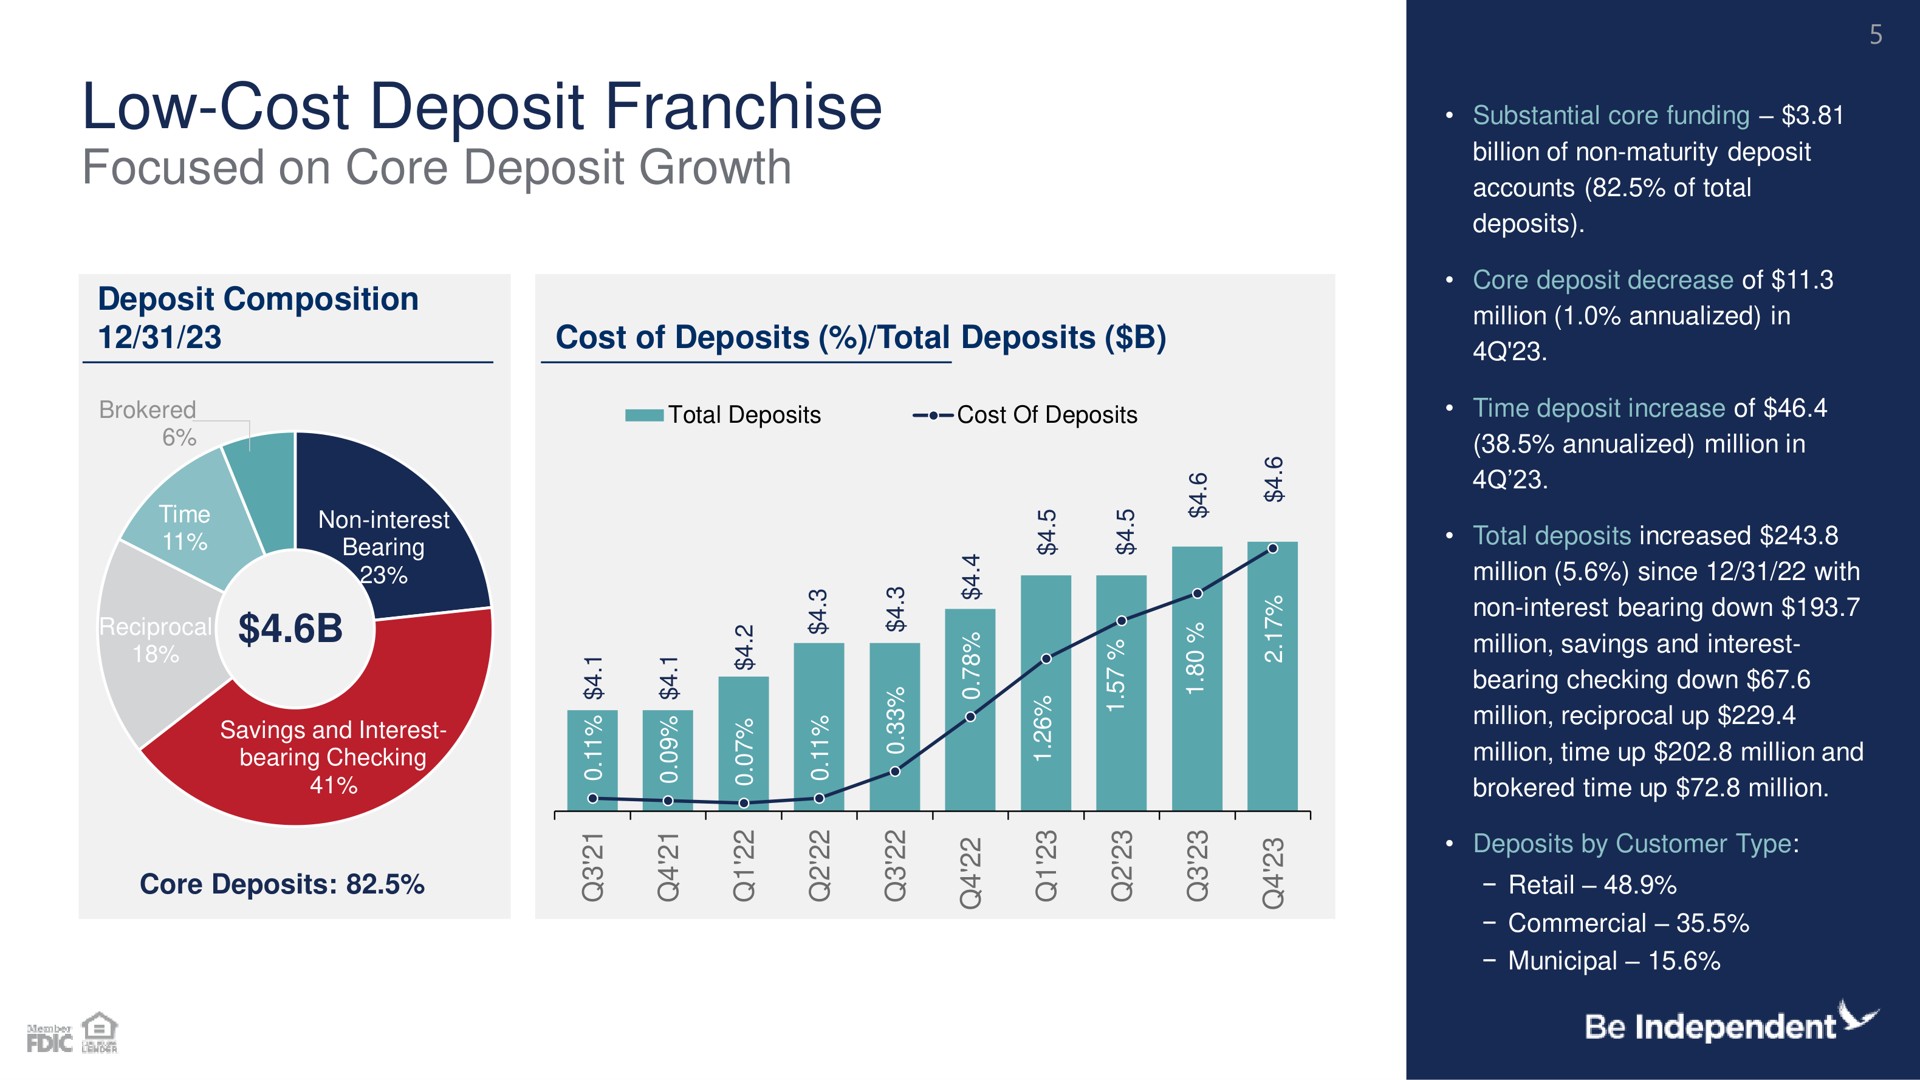 low cost deposit franchise focused on core deposit growth | Independent Bank Corp